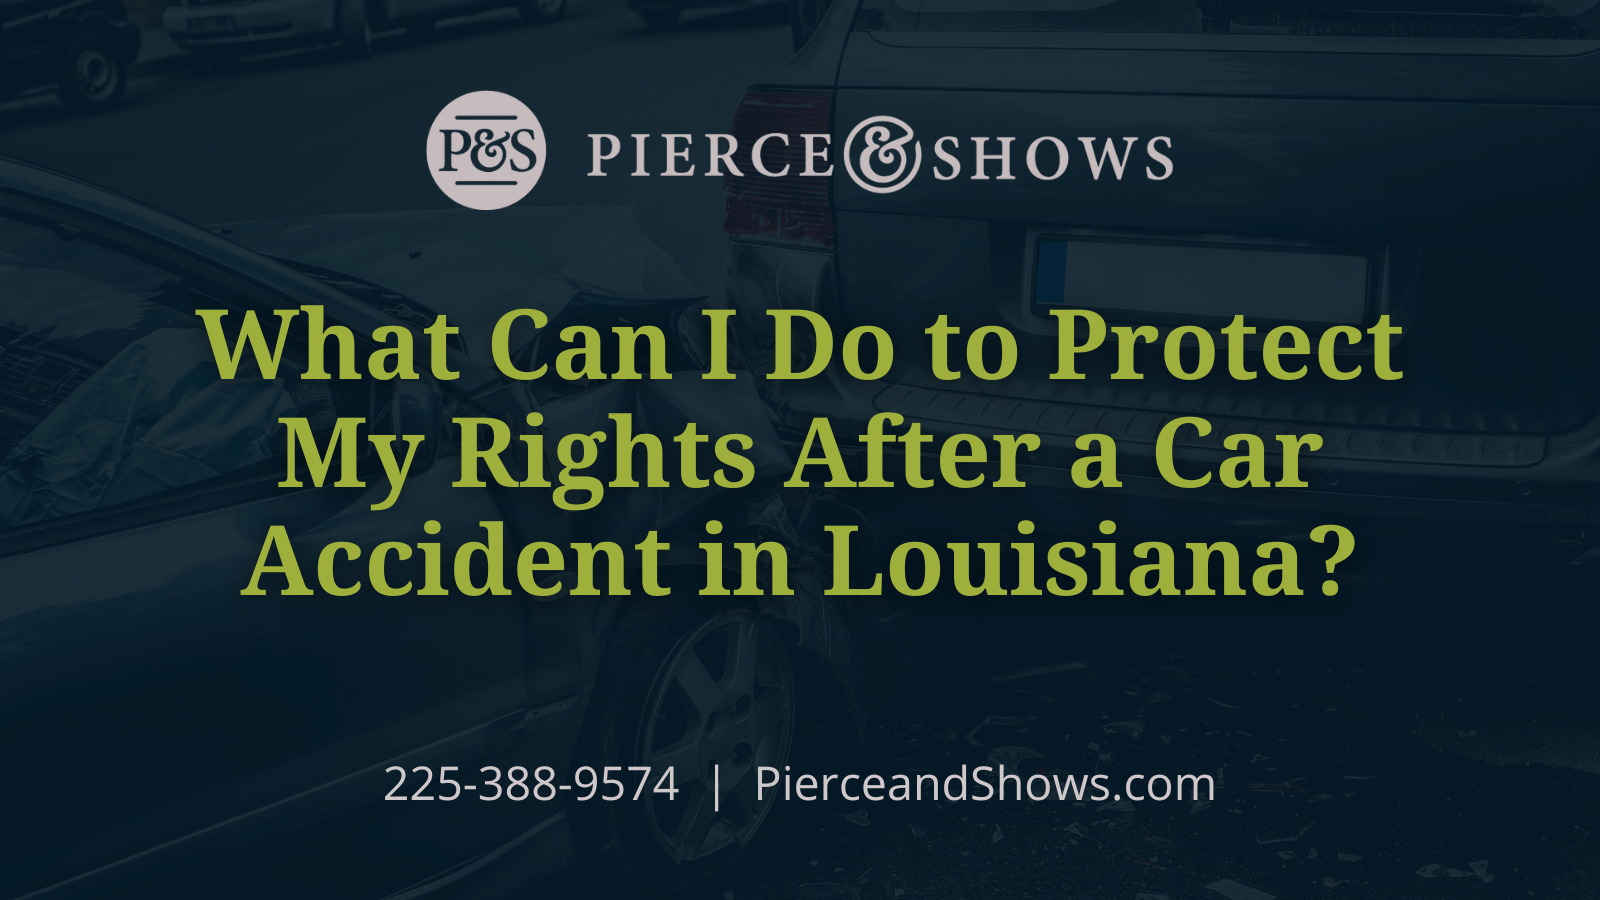 What Can I Do to Protect My Rights After a Car Accident in Louisiana? - Baton Rouge Louisiana injury attorney Pierce & Shows